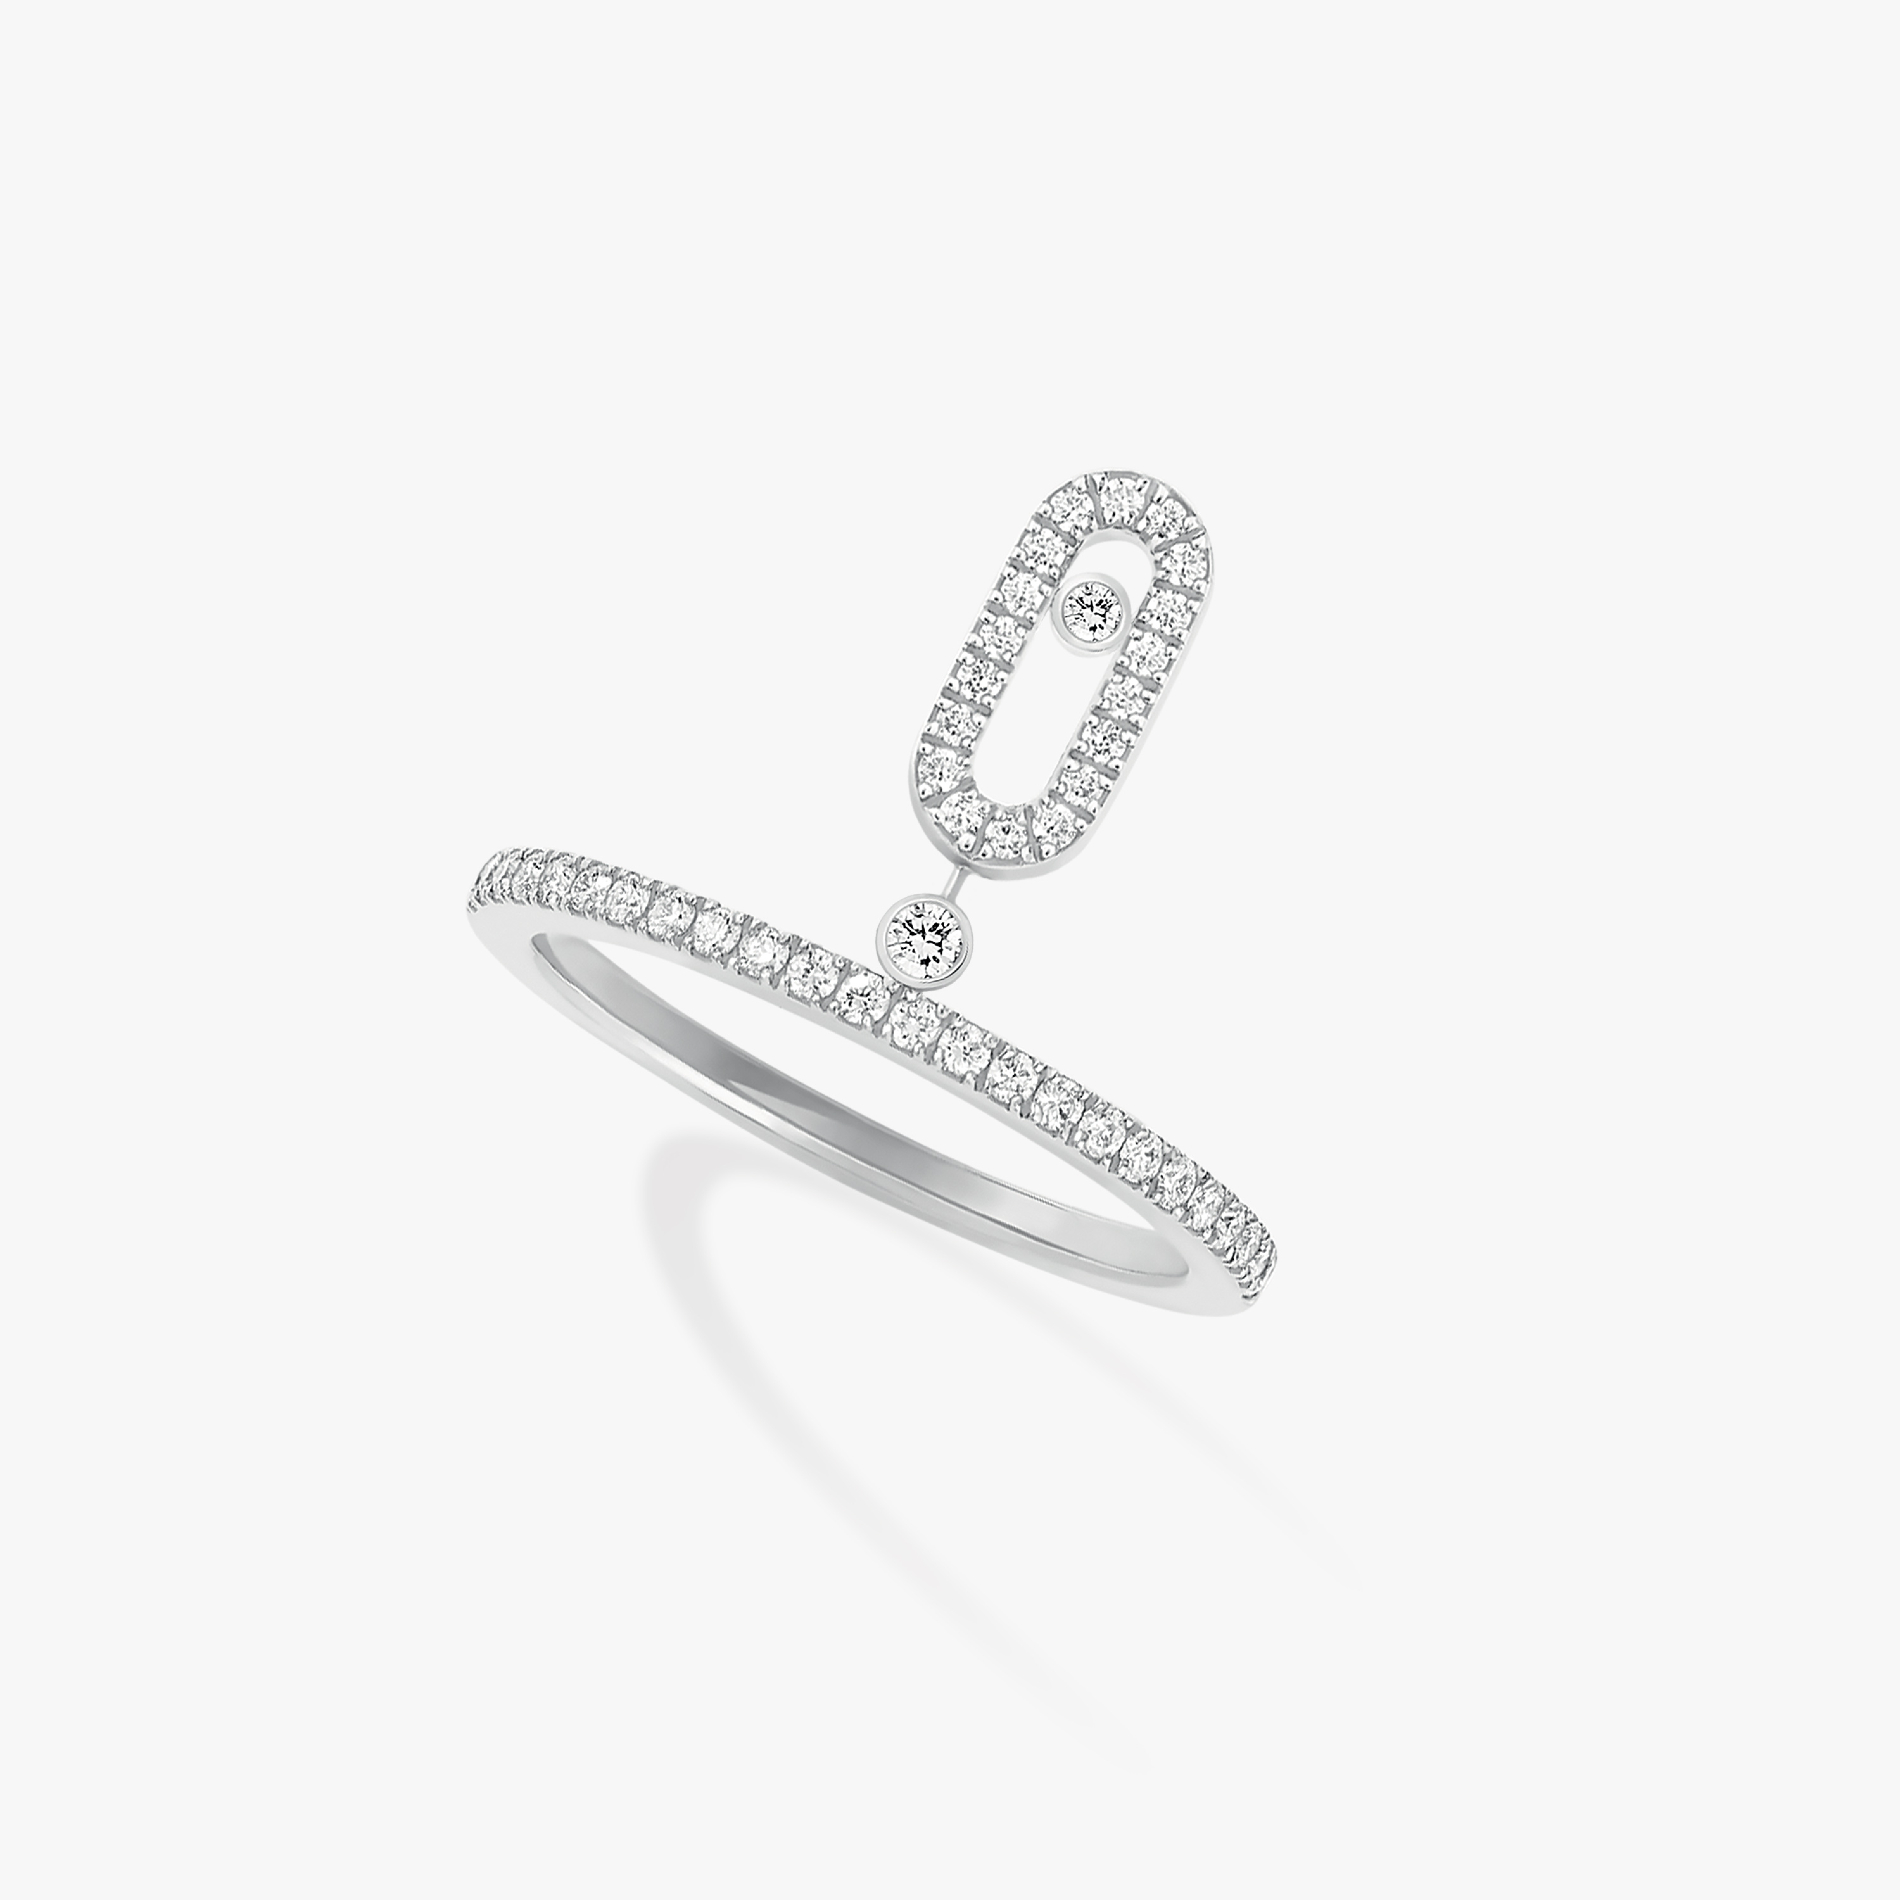 Move Uno Pavé Drop White Gold For Her Diamond Ring 11163-WG